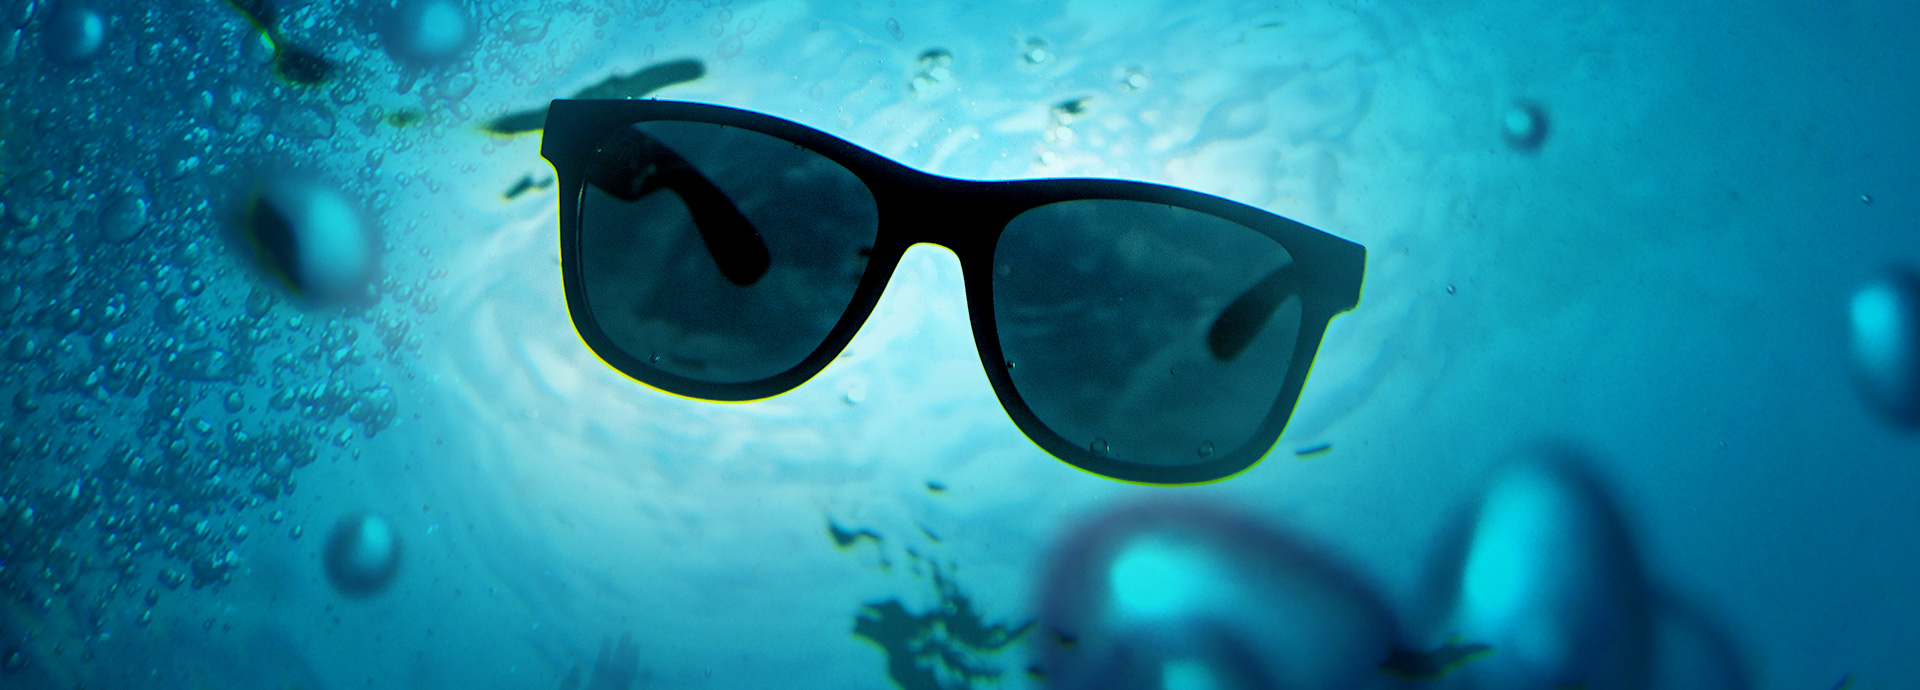 Float₂O Floating Sunglasses - Floating Polarized Sunglasses for Water Sports